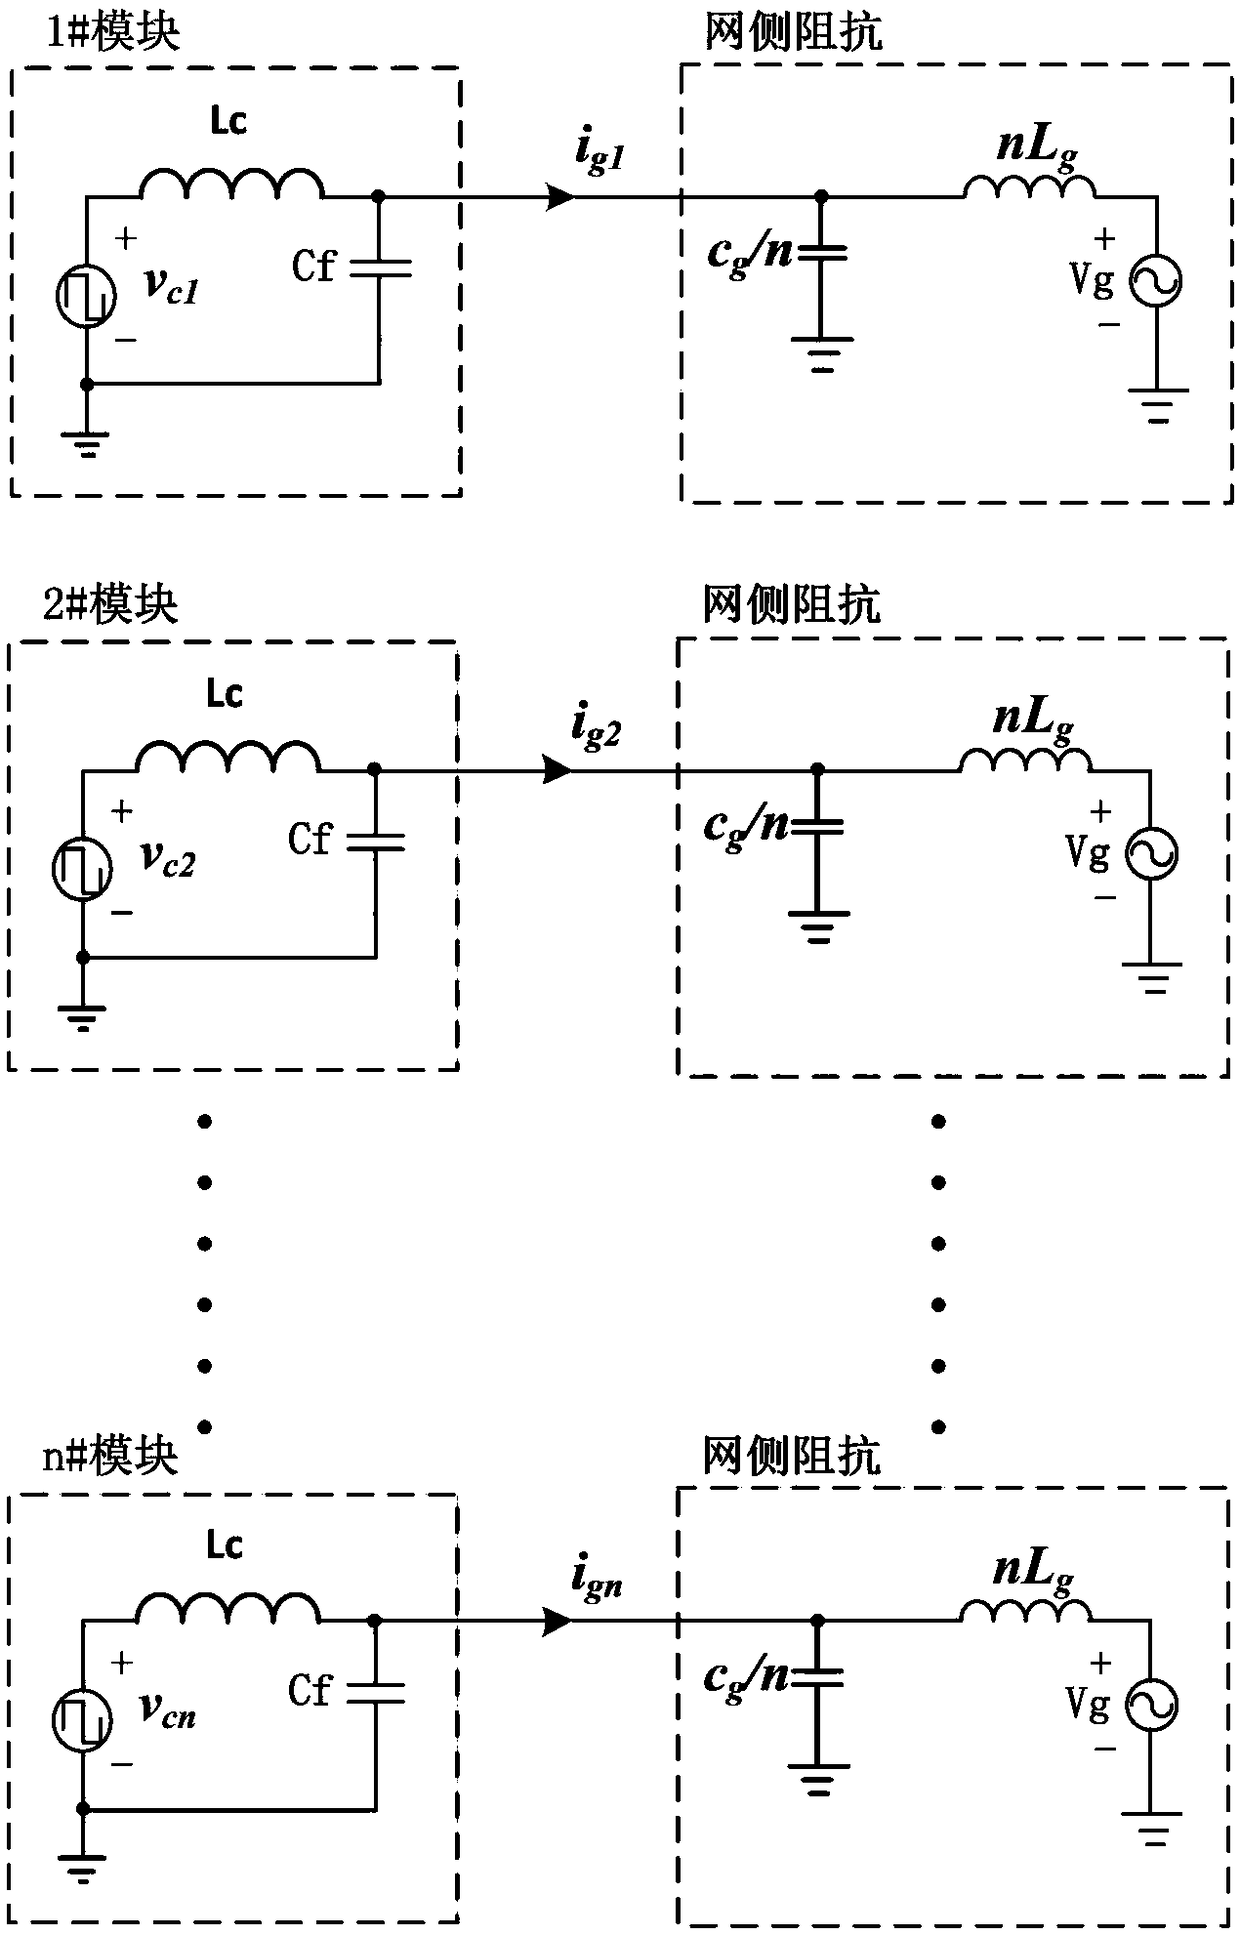 A Photovoltaic Parallel Inverter System with Shared Capacitor Topology